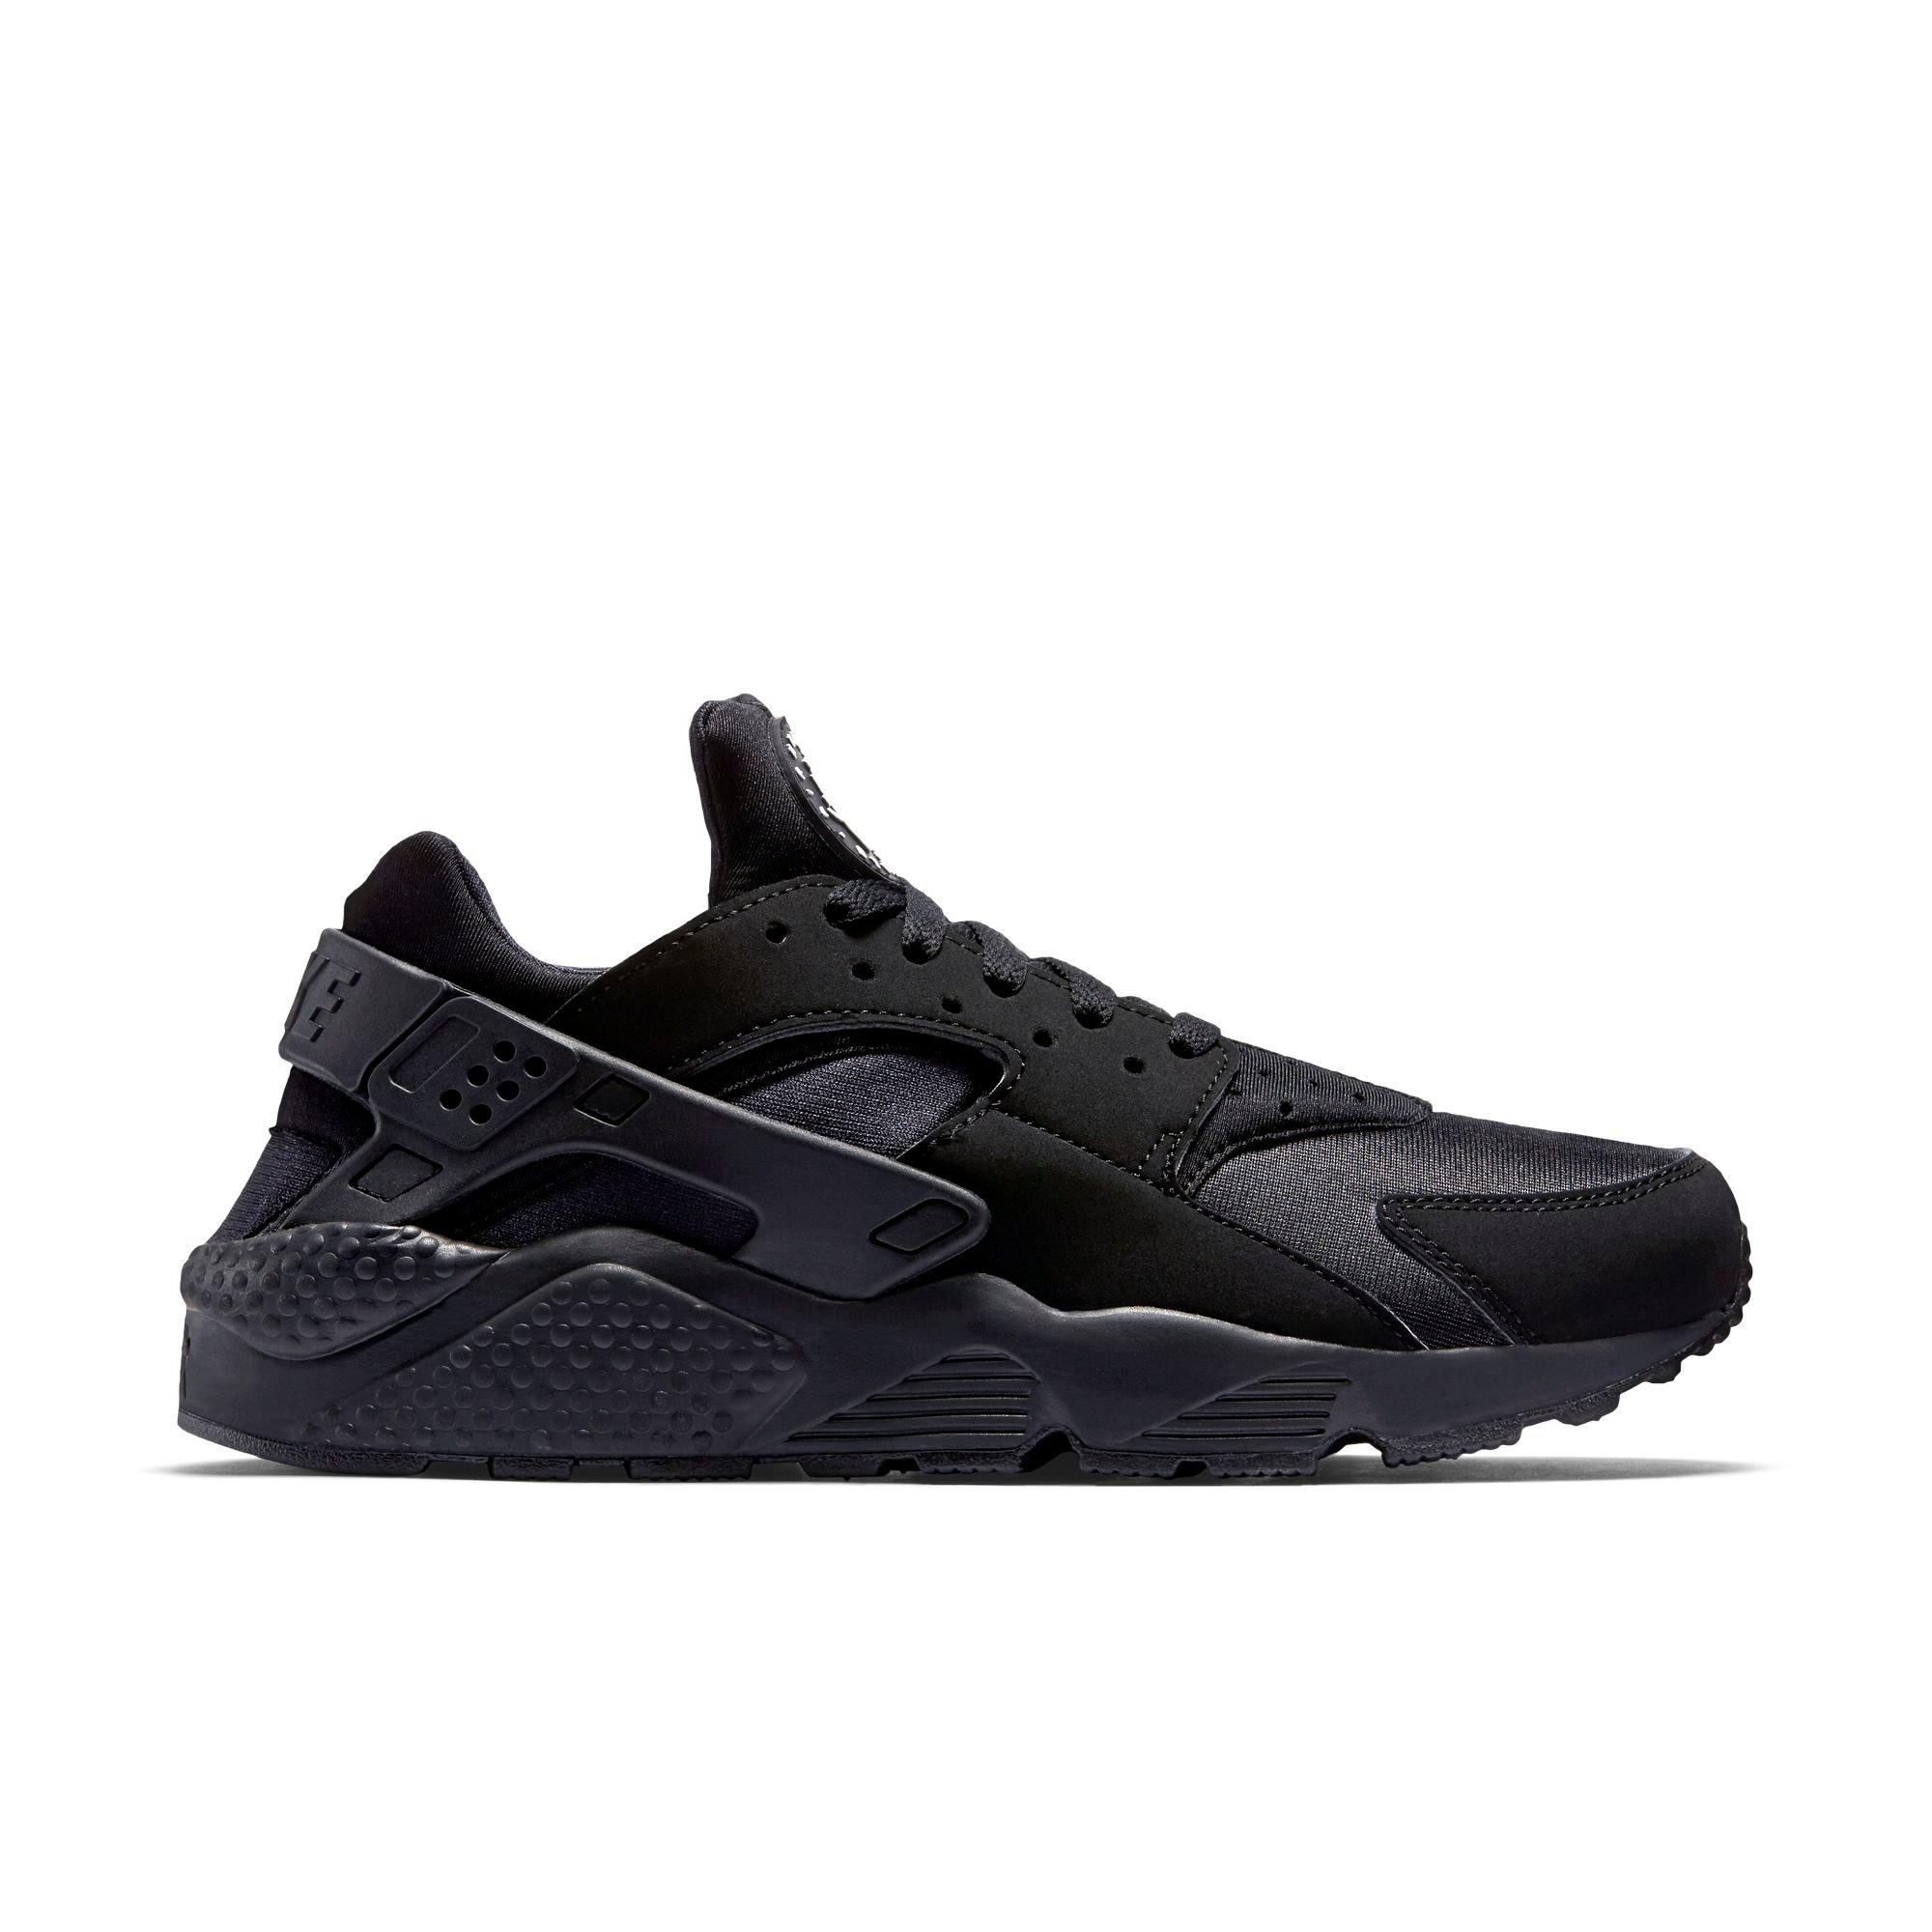 huaraches the shoes